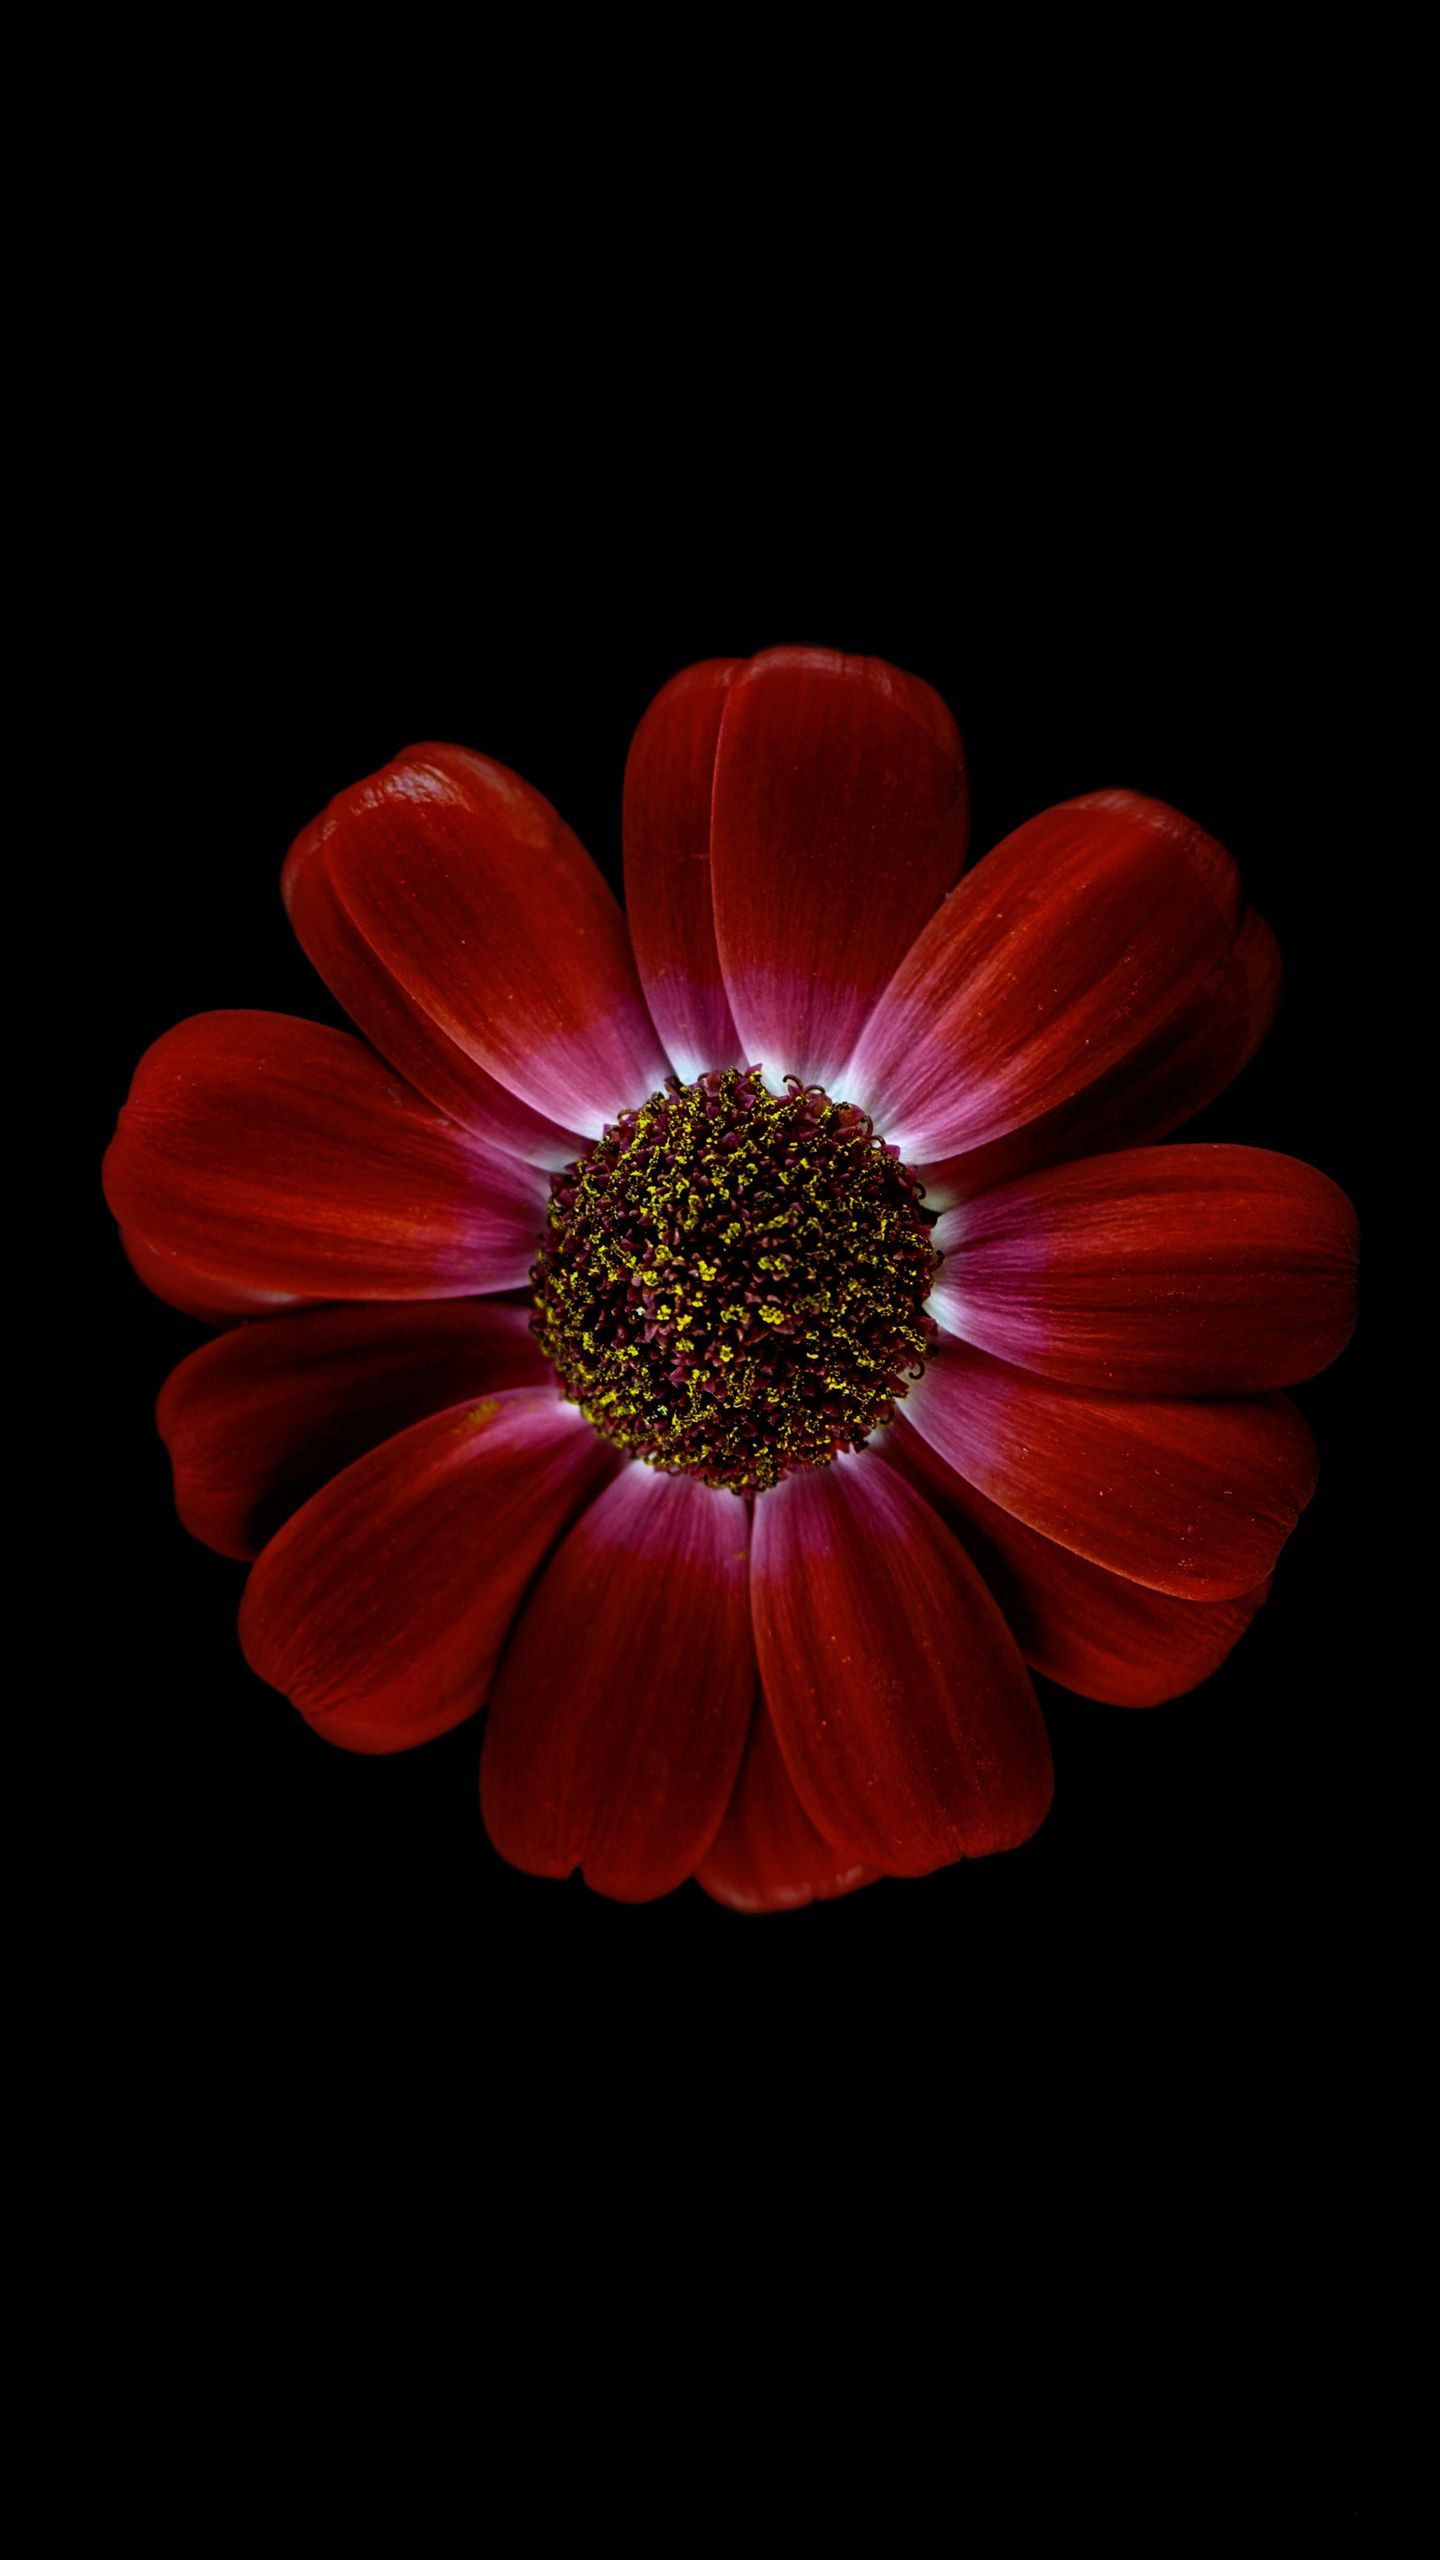 Amoled Floral 4k Mobile Wallpapers - Wallpaper Cave